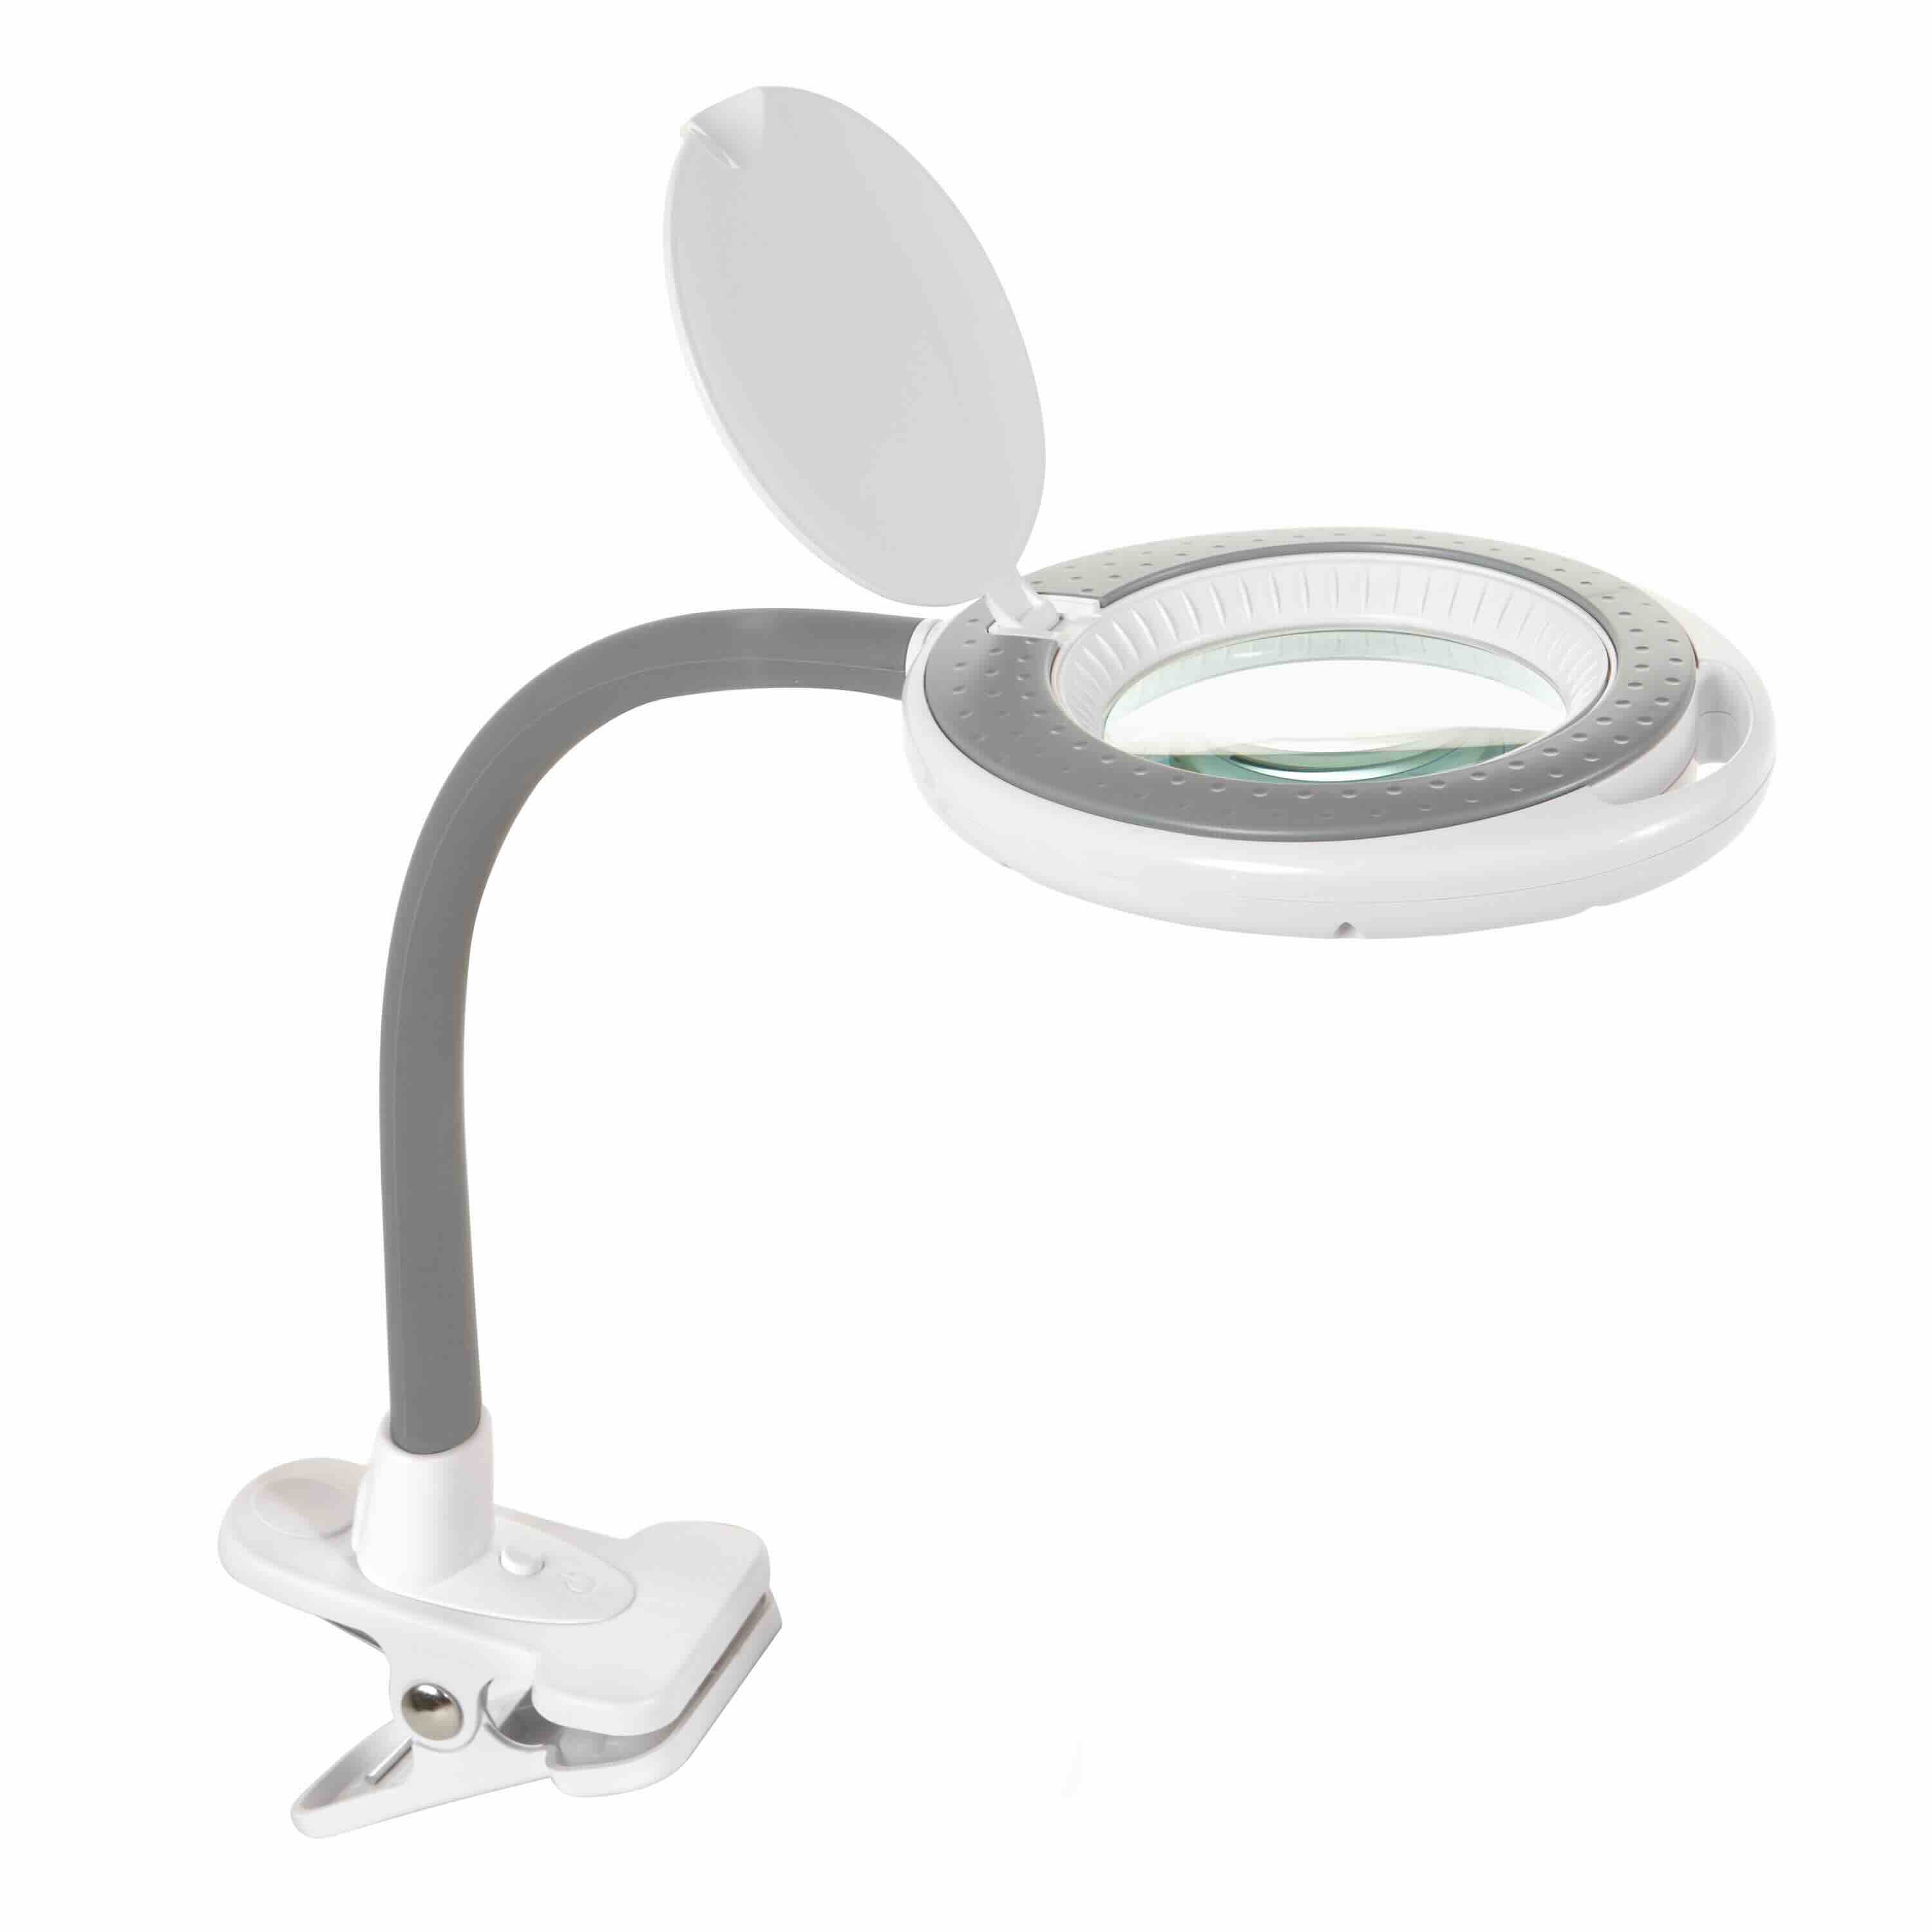 How Long Can A Properly Maintained Magnifying Lamp Last